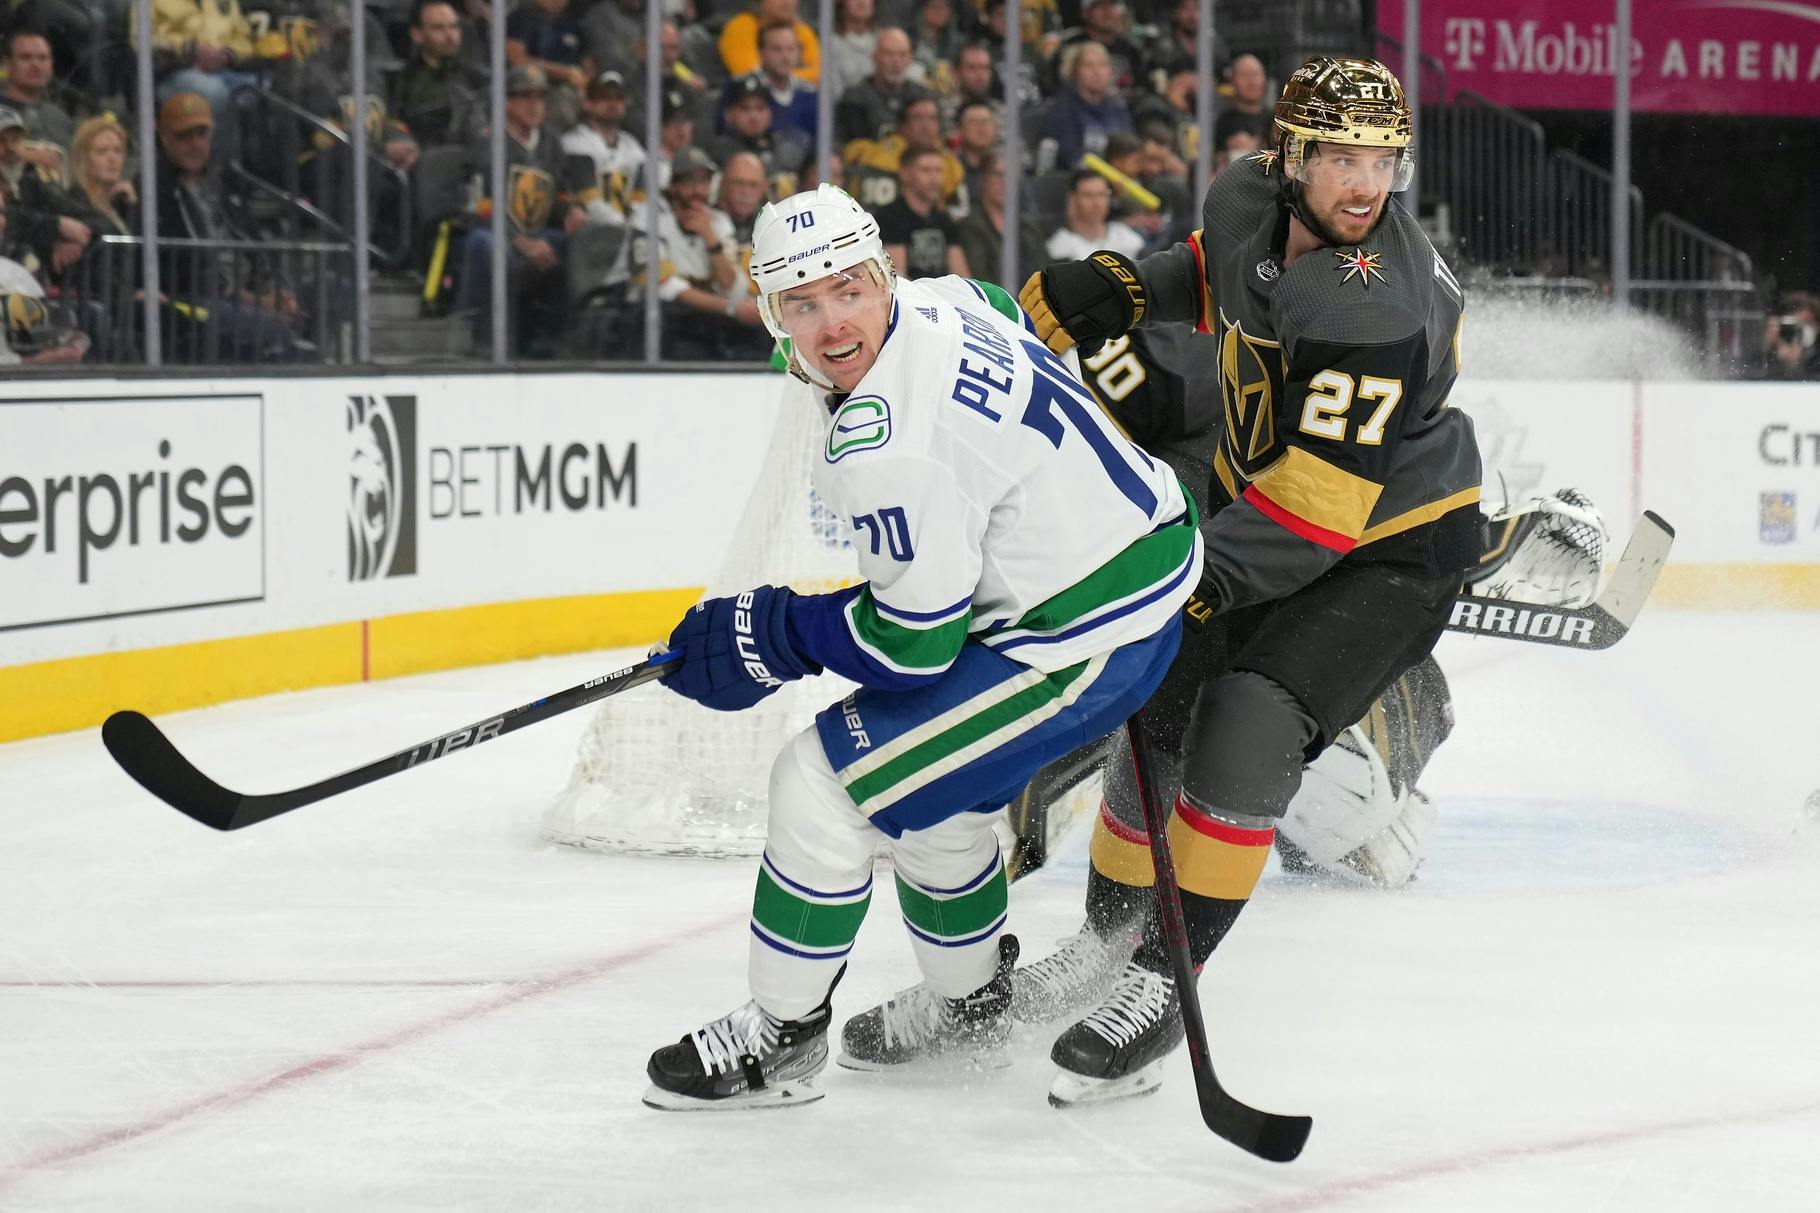 Canucks 2, Knights 1: Demko delivers in relief for sensational NHL